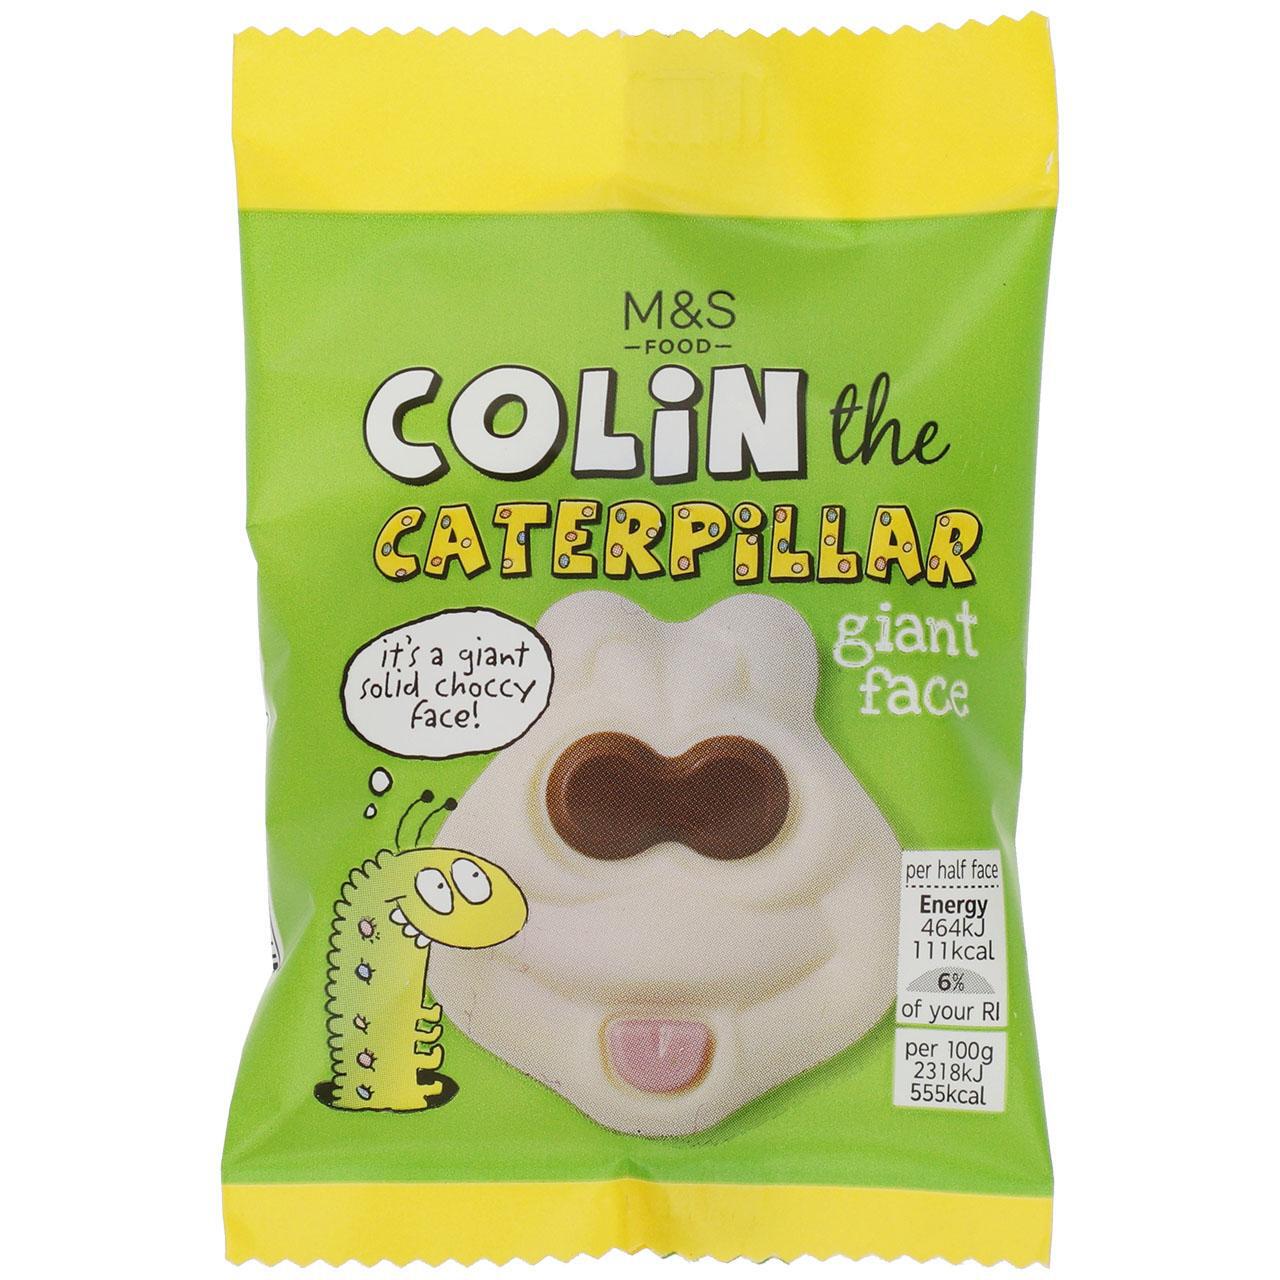 M&S Colin the Caterpillar Giant Chocolate Face 40g